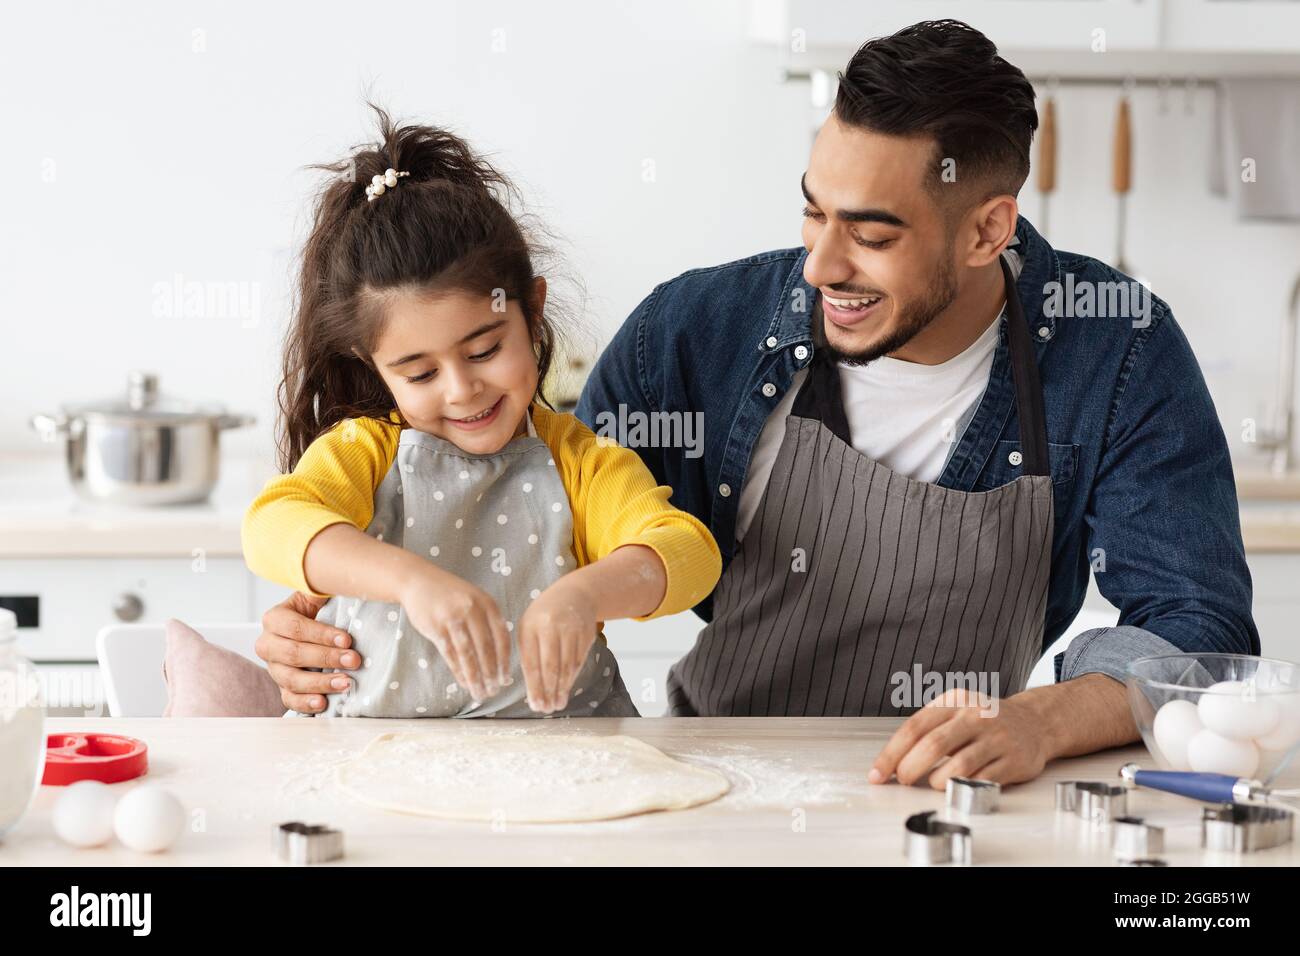 Cheerful arab dad and little daughter baking together in kitchen, making pizza Stock Photo